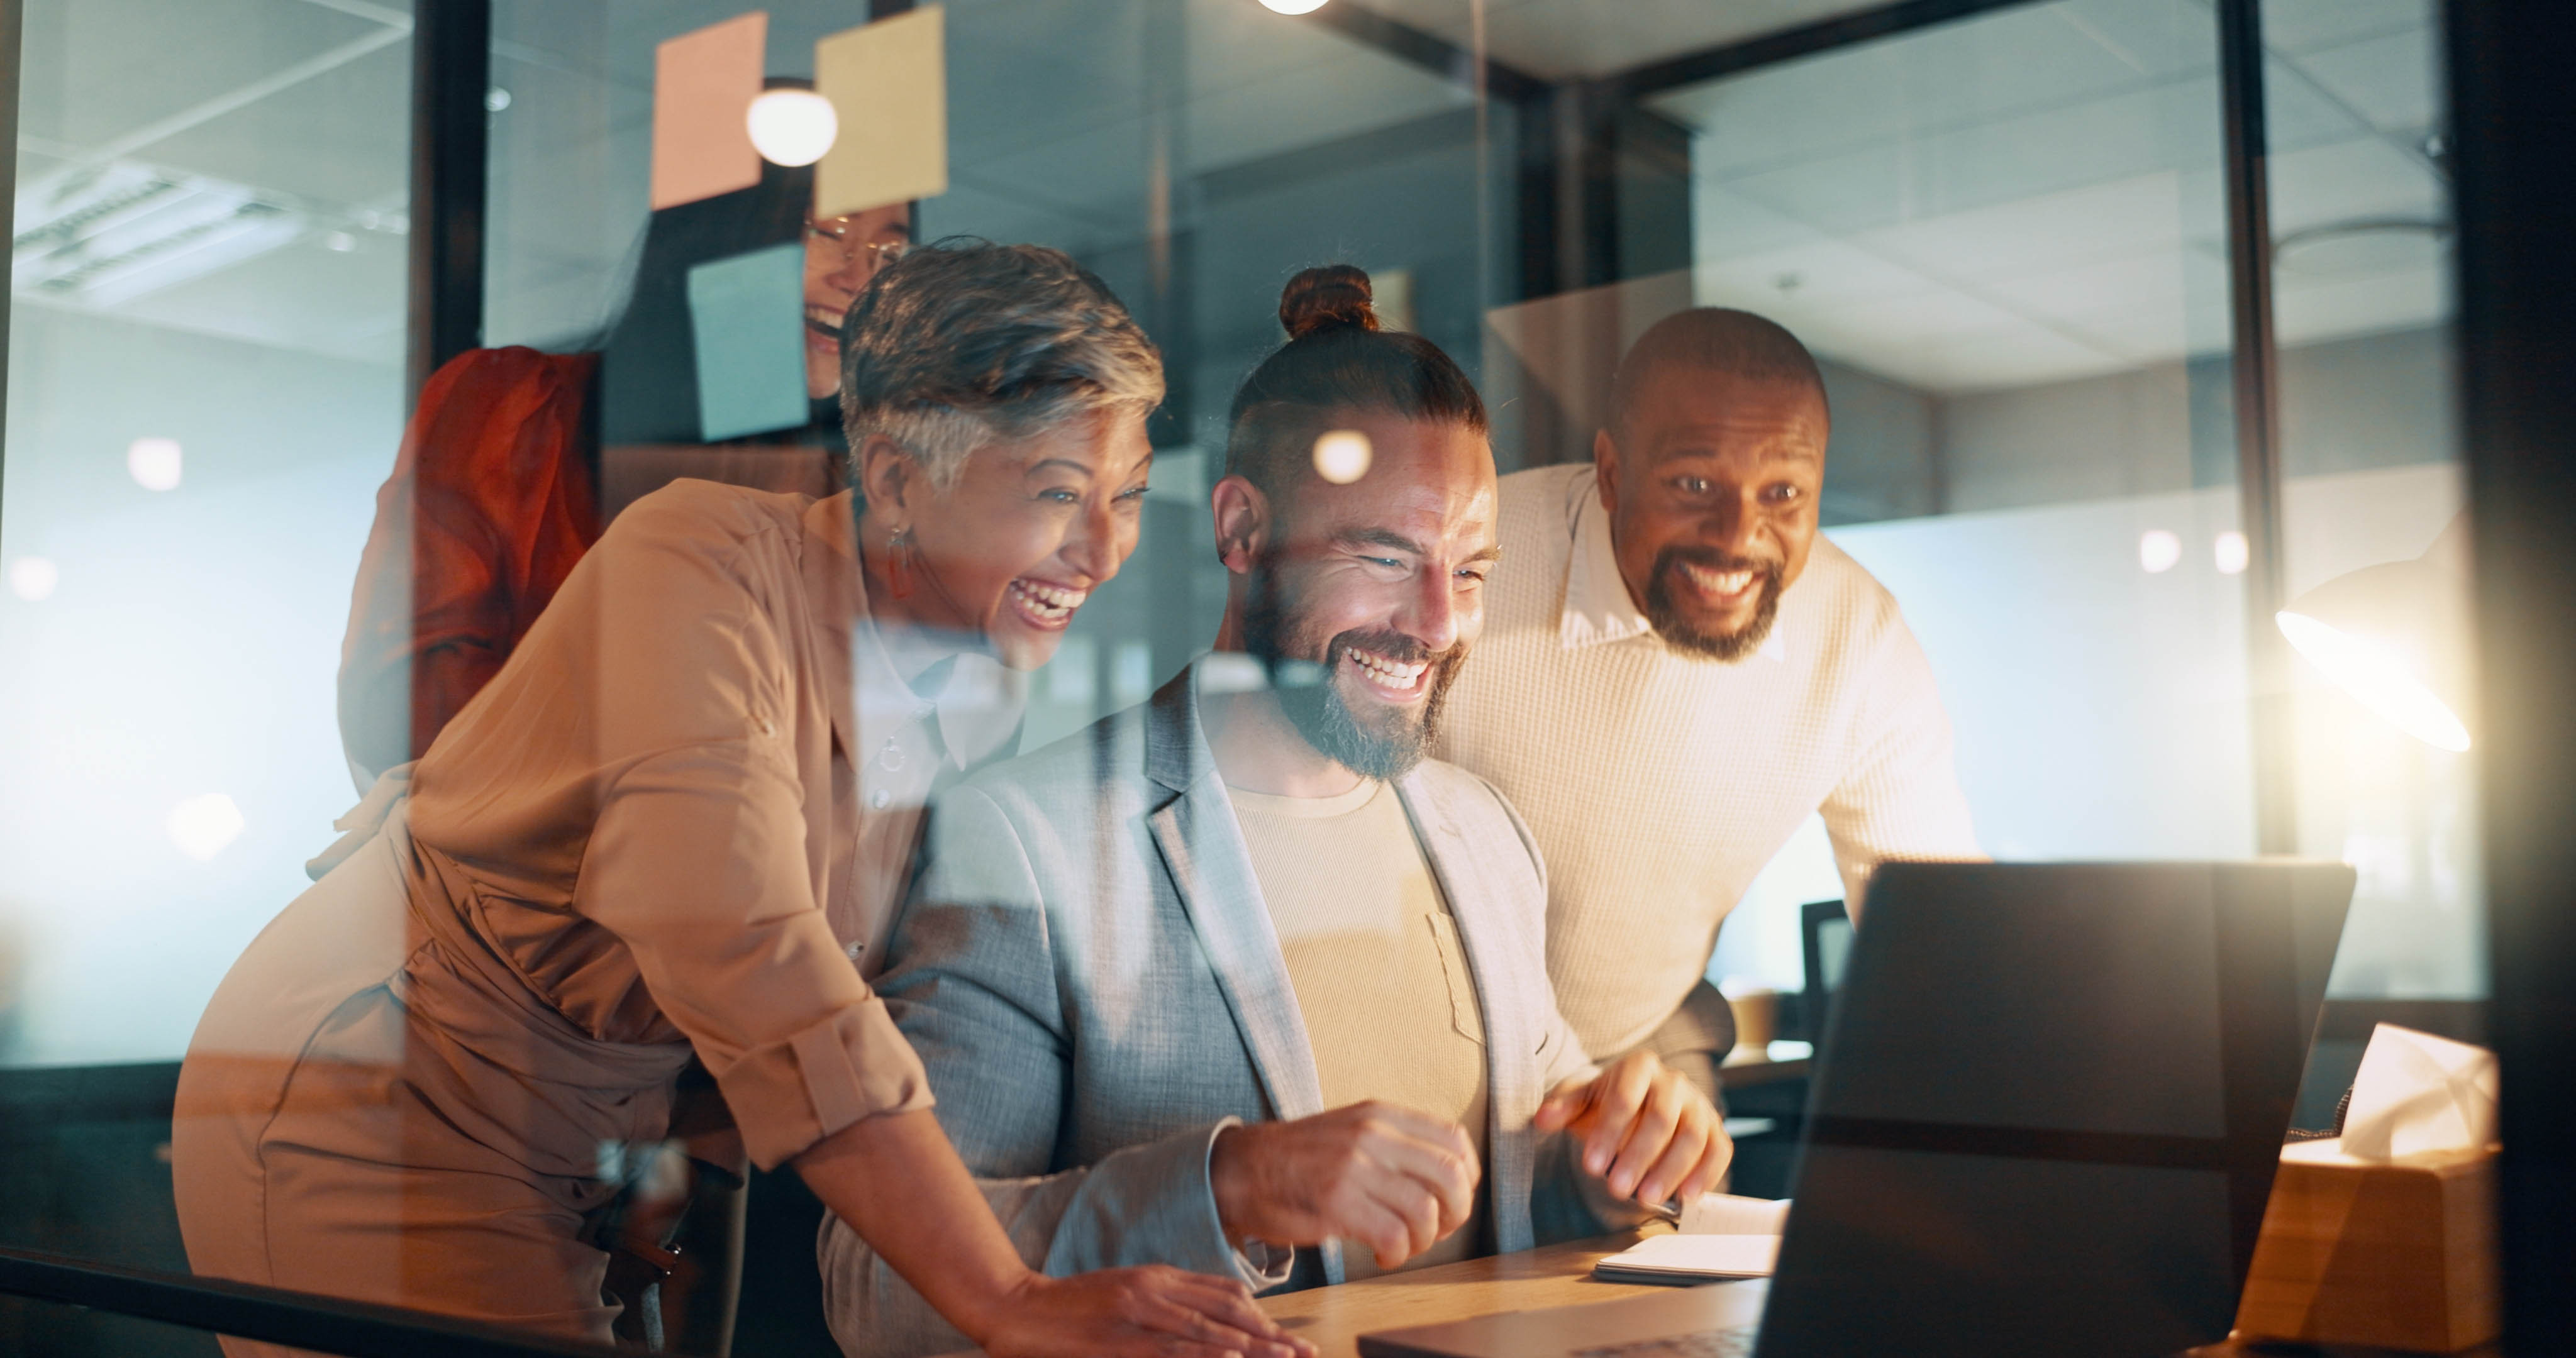 Diverse group of workmates sitting together in front of a computer laughing